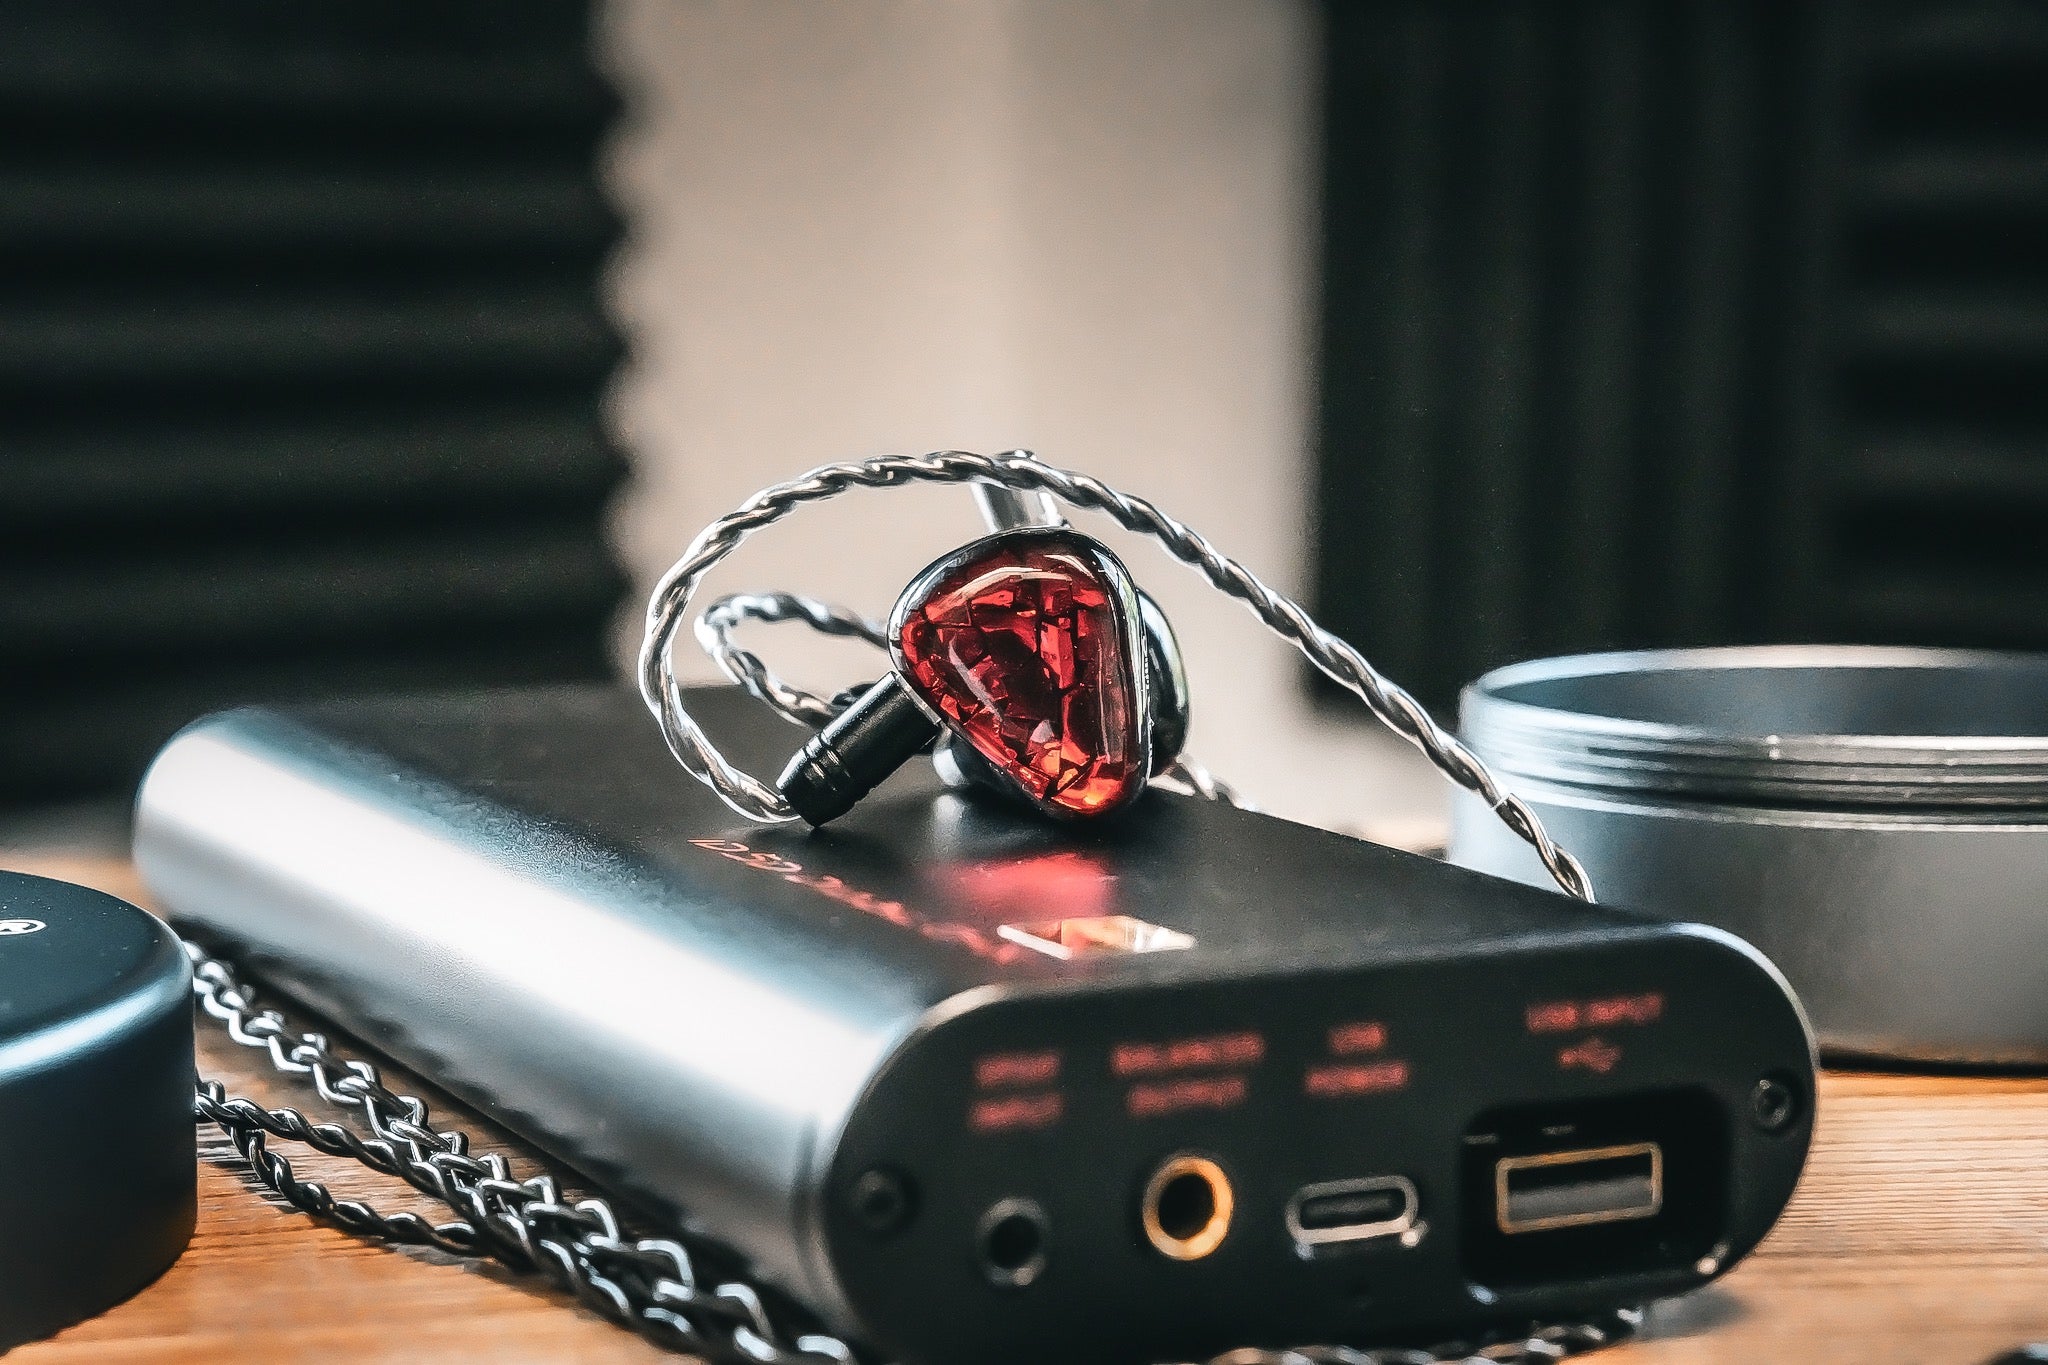 MEMS-2 IEM on top of the iFi Diablo-X accompanied by its included cable and aluminum case from the Bloom Audio Gallery